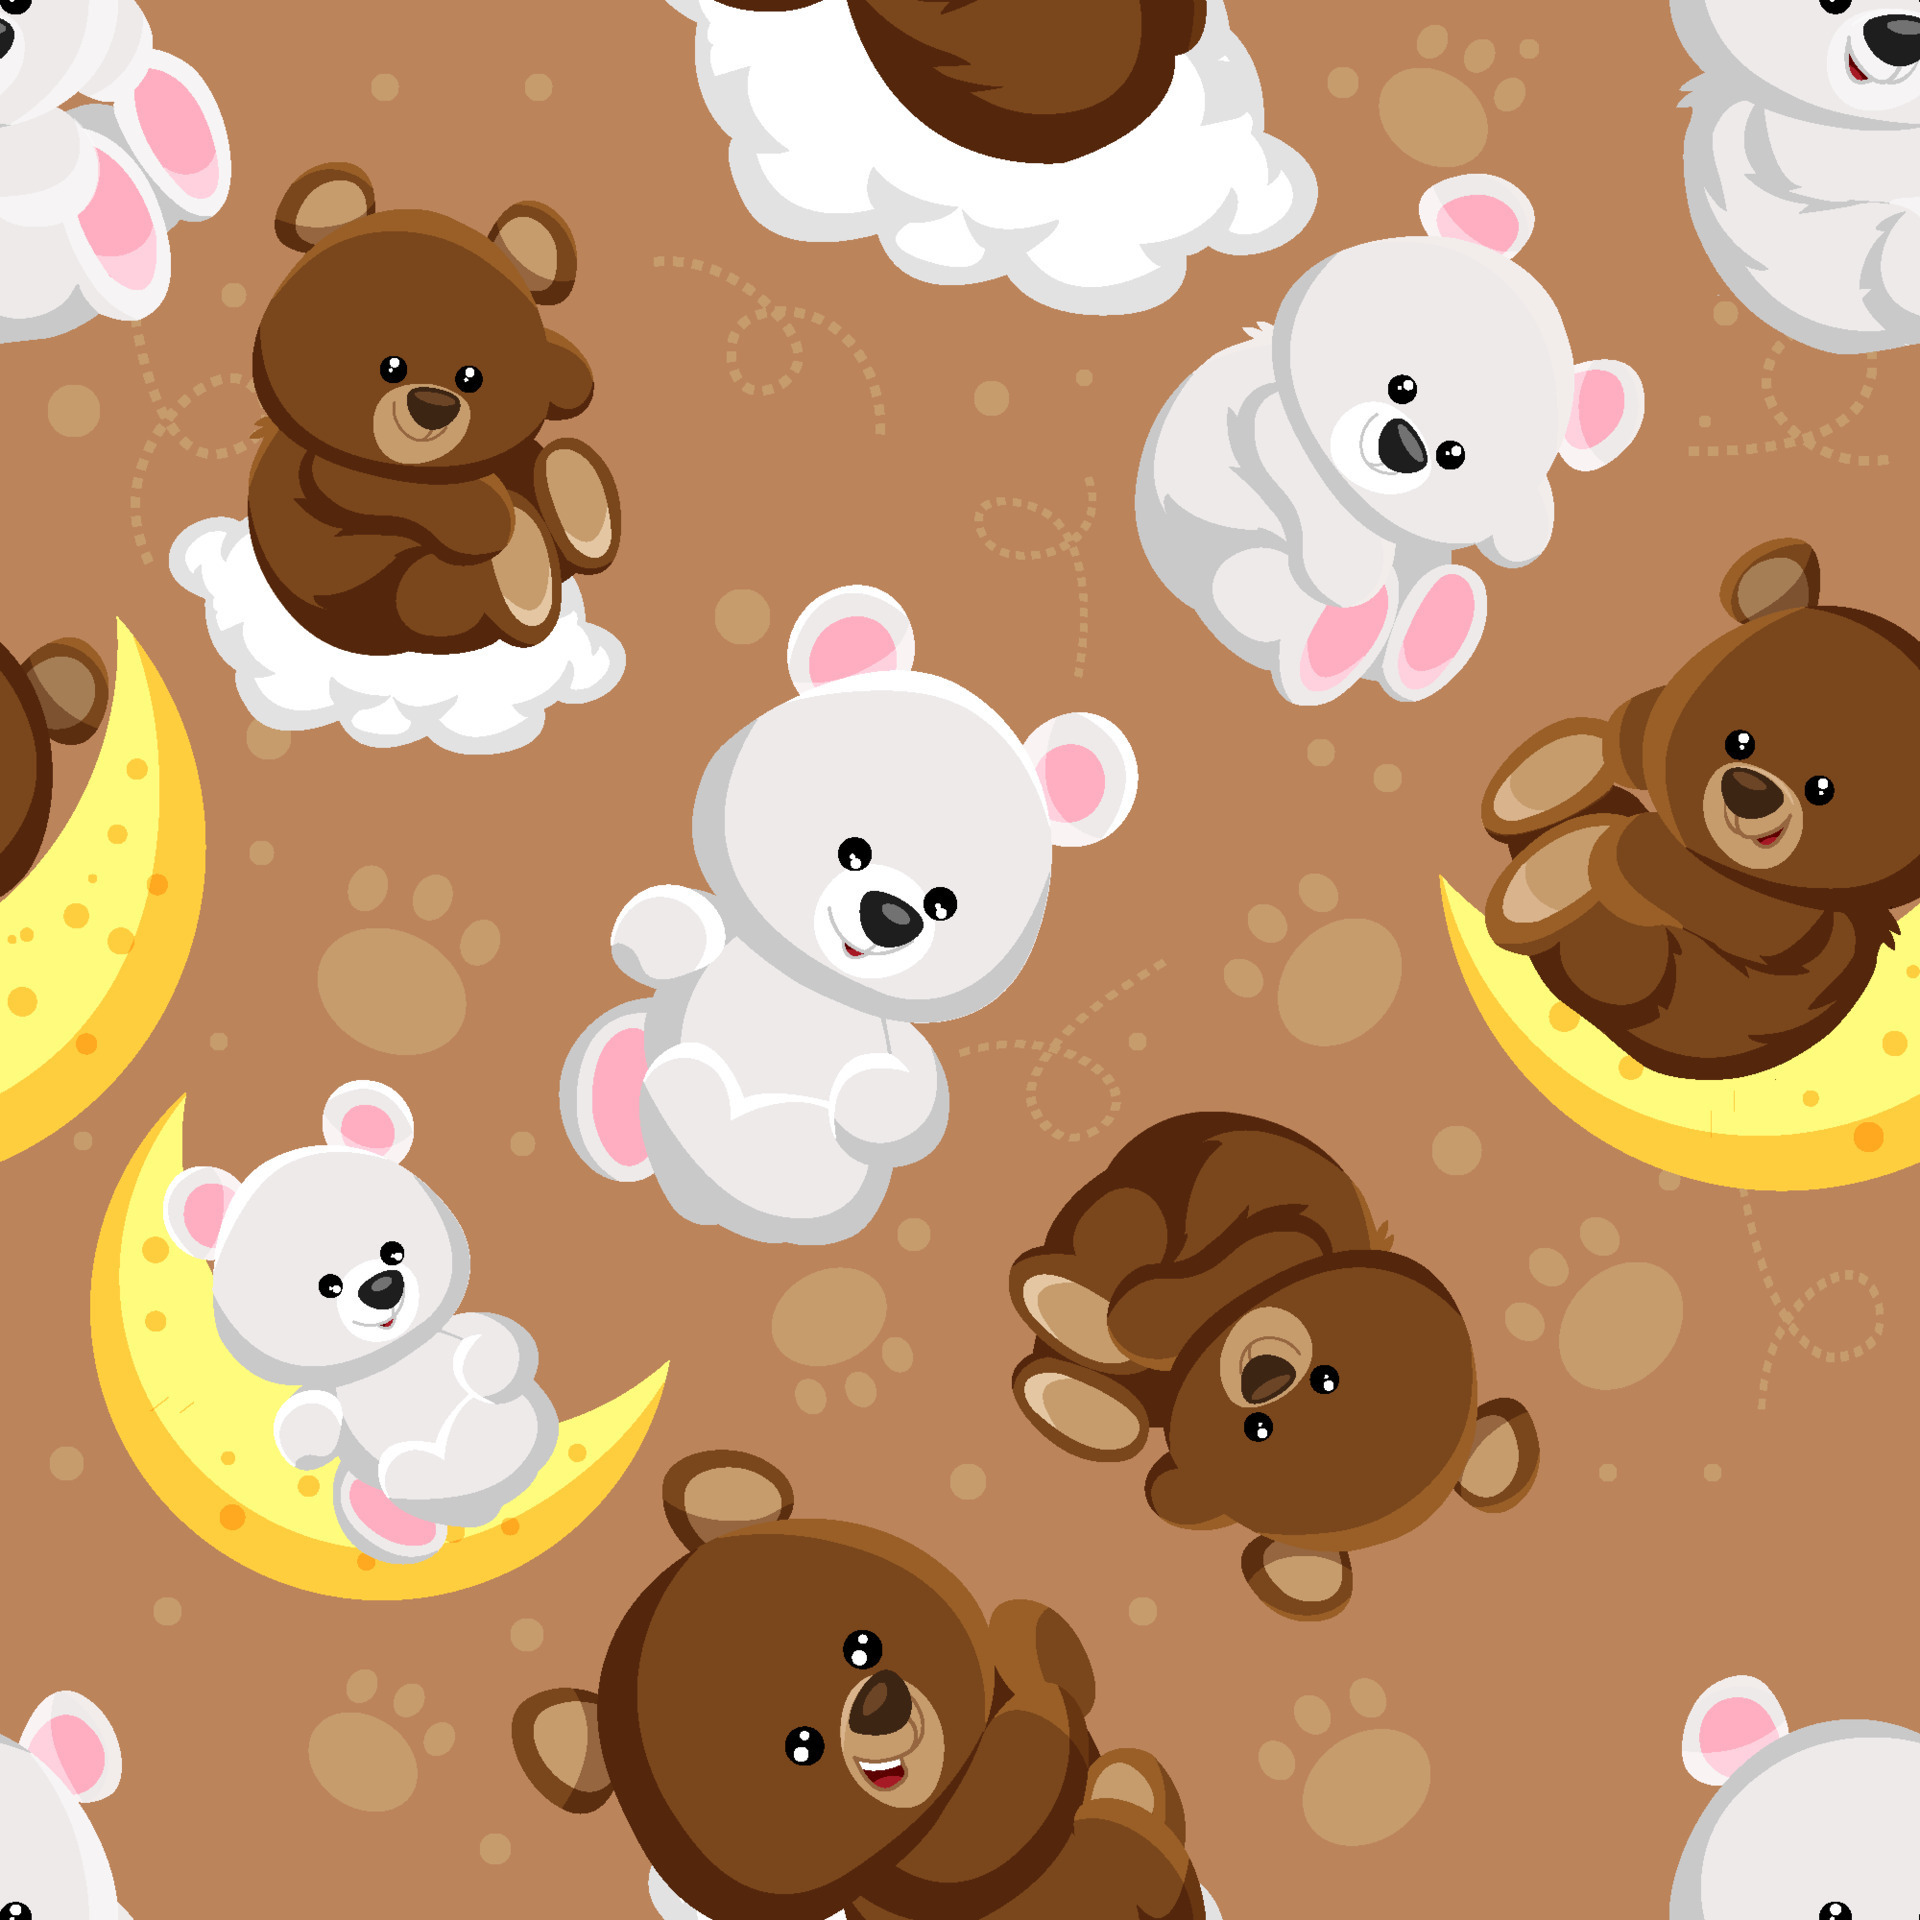 Cute Brown and White Teddy Bear Seamless Background 8412162 Vector ...